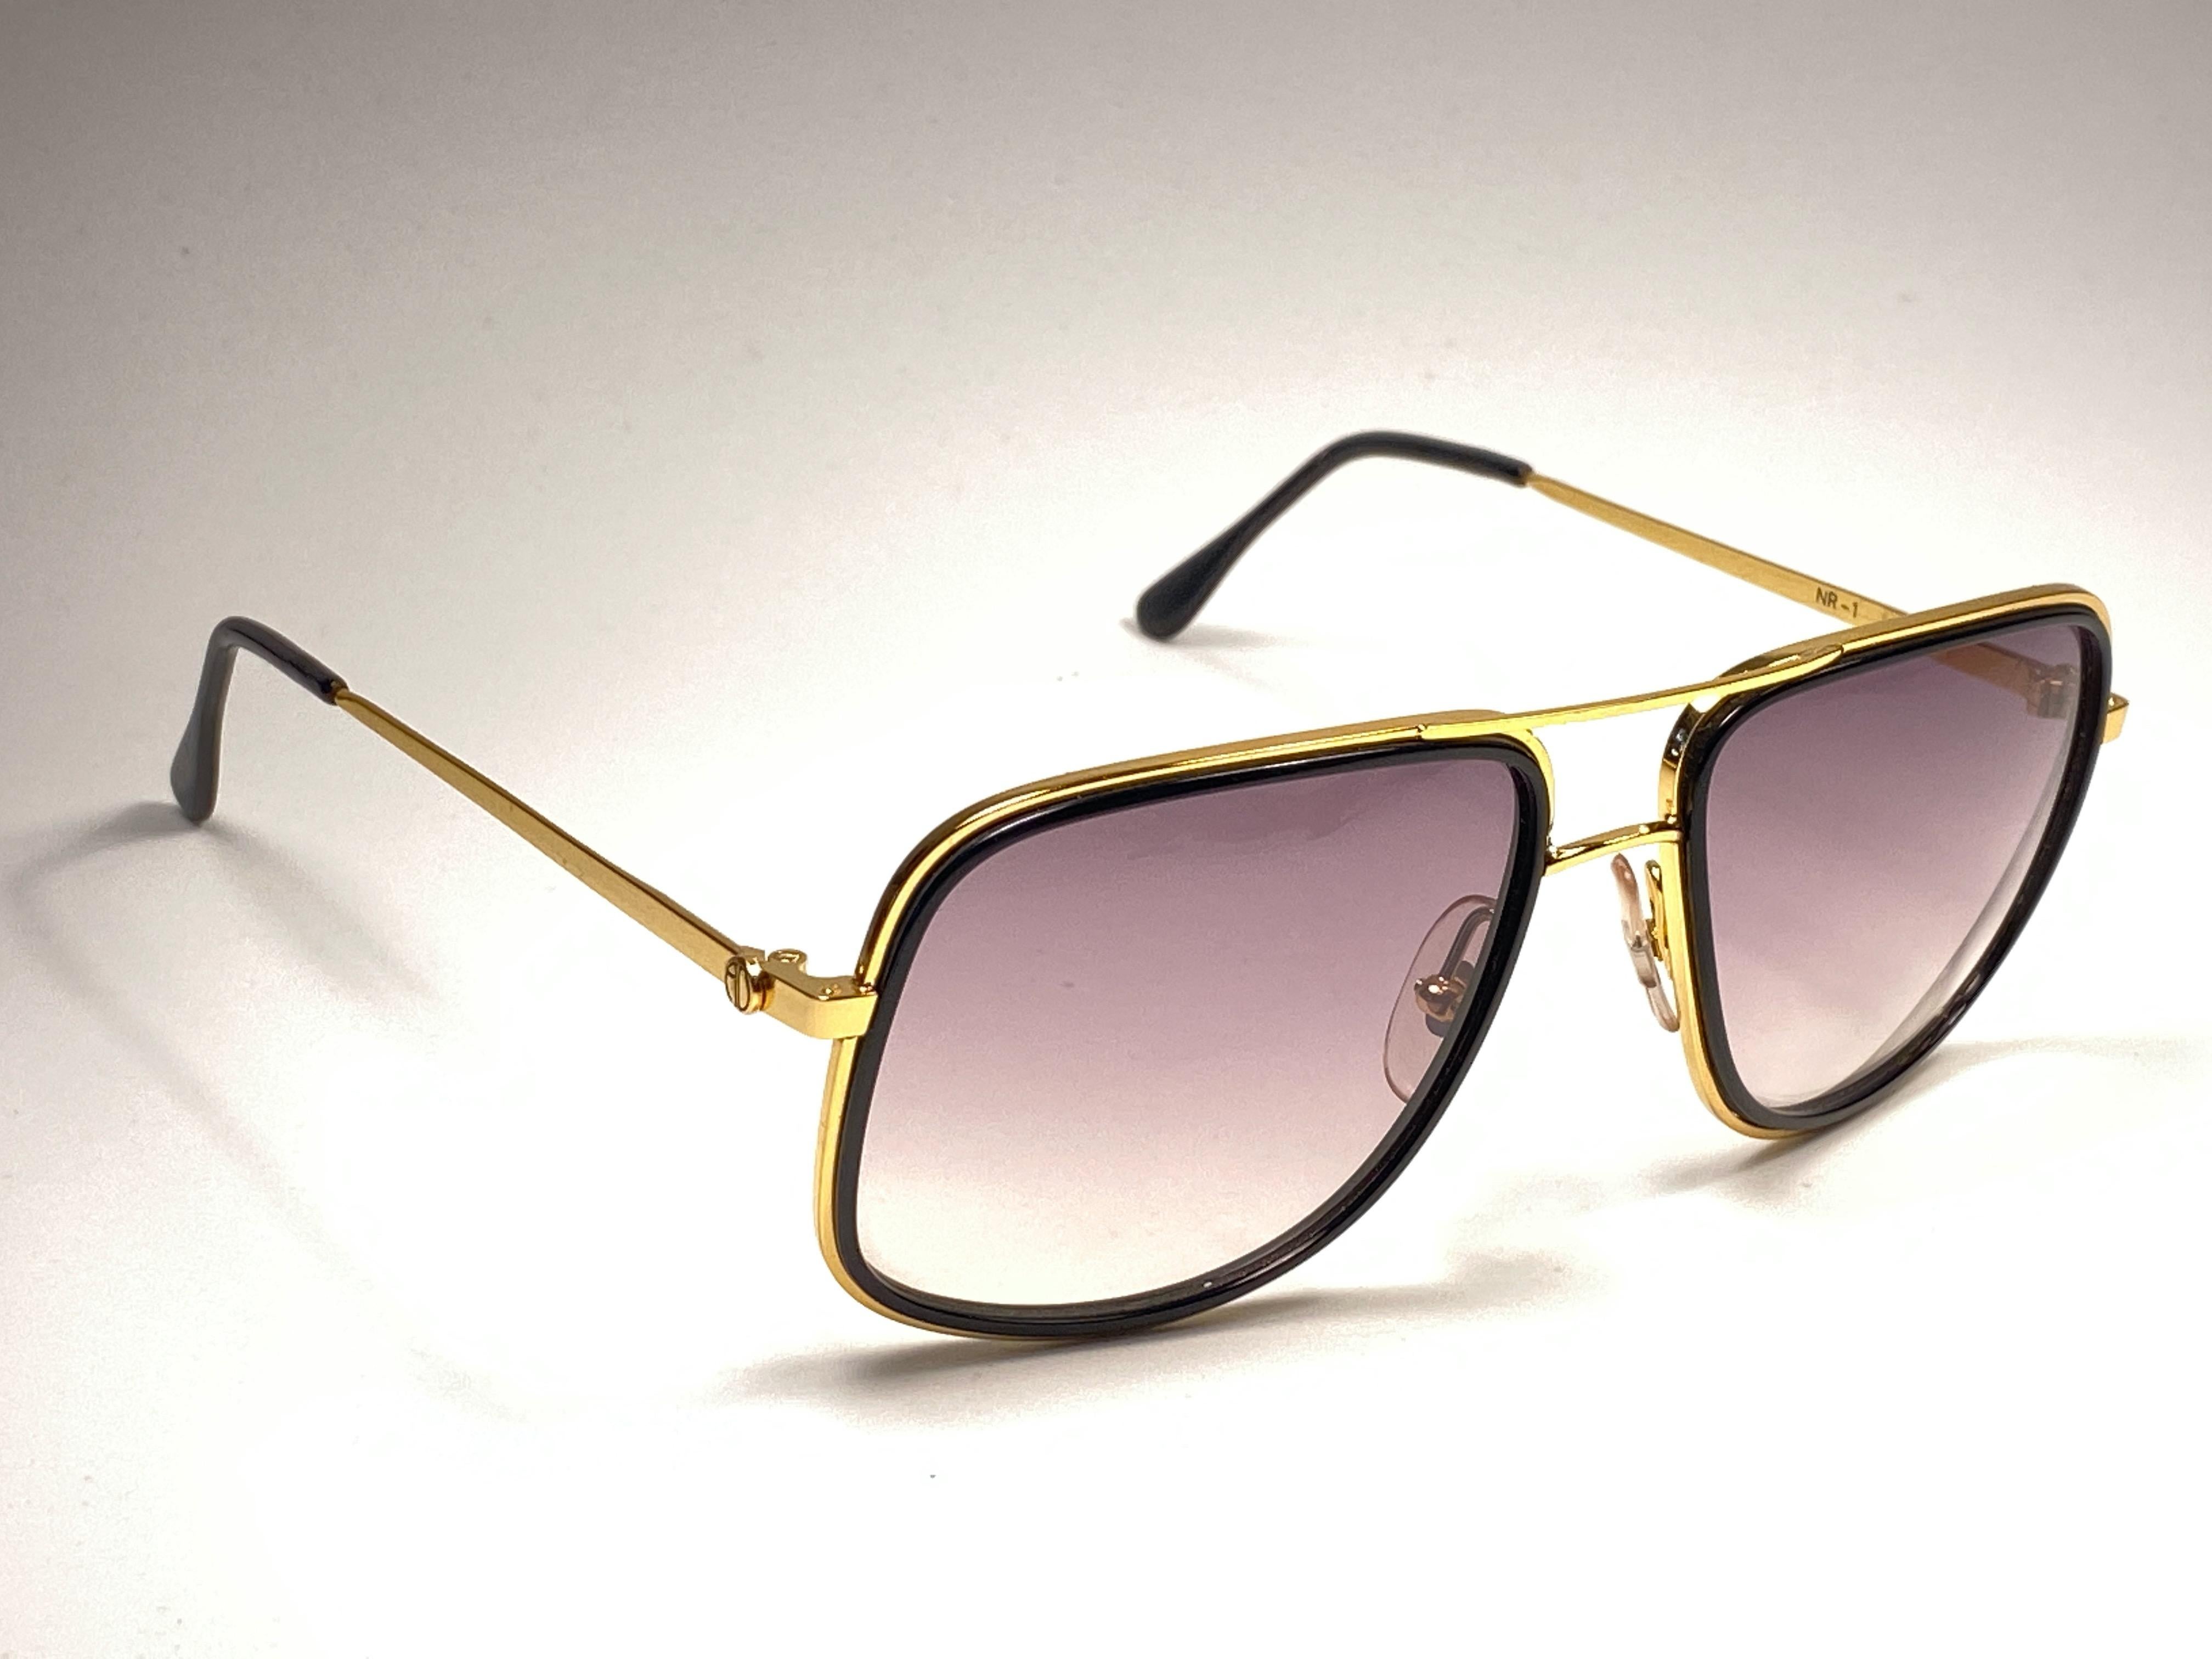 New vintage Alain Delon sunglasses.

Oversized gold with black details frame holding a pair of spotless brown gradient lenses.   

New, never worn or displayed. 

 Made in Italy.

MEASUREMENTS 



FRONT : 14 CMS

LENS HEIGHT : 4.5 CMS

LENS WIDTH :